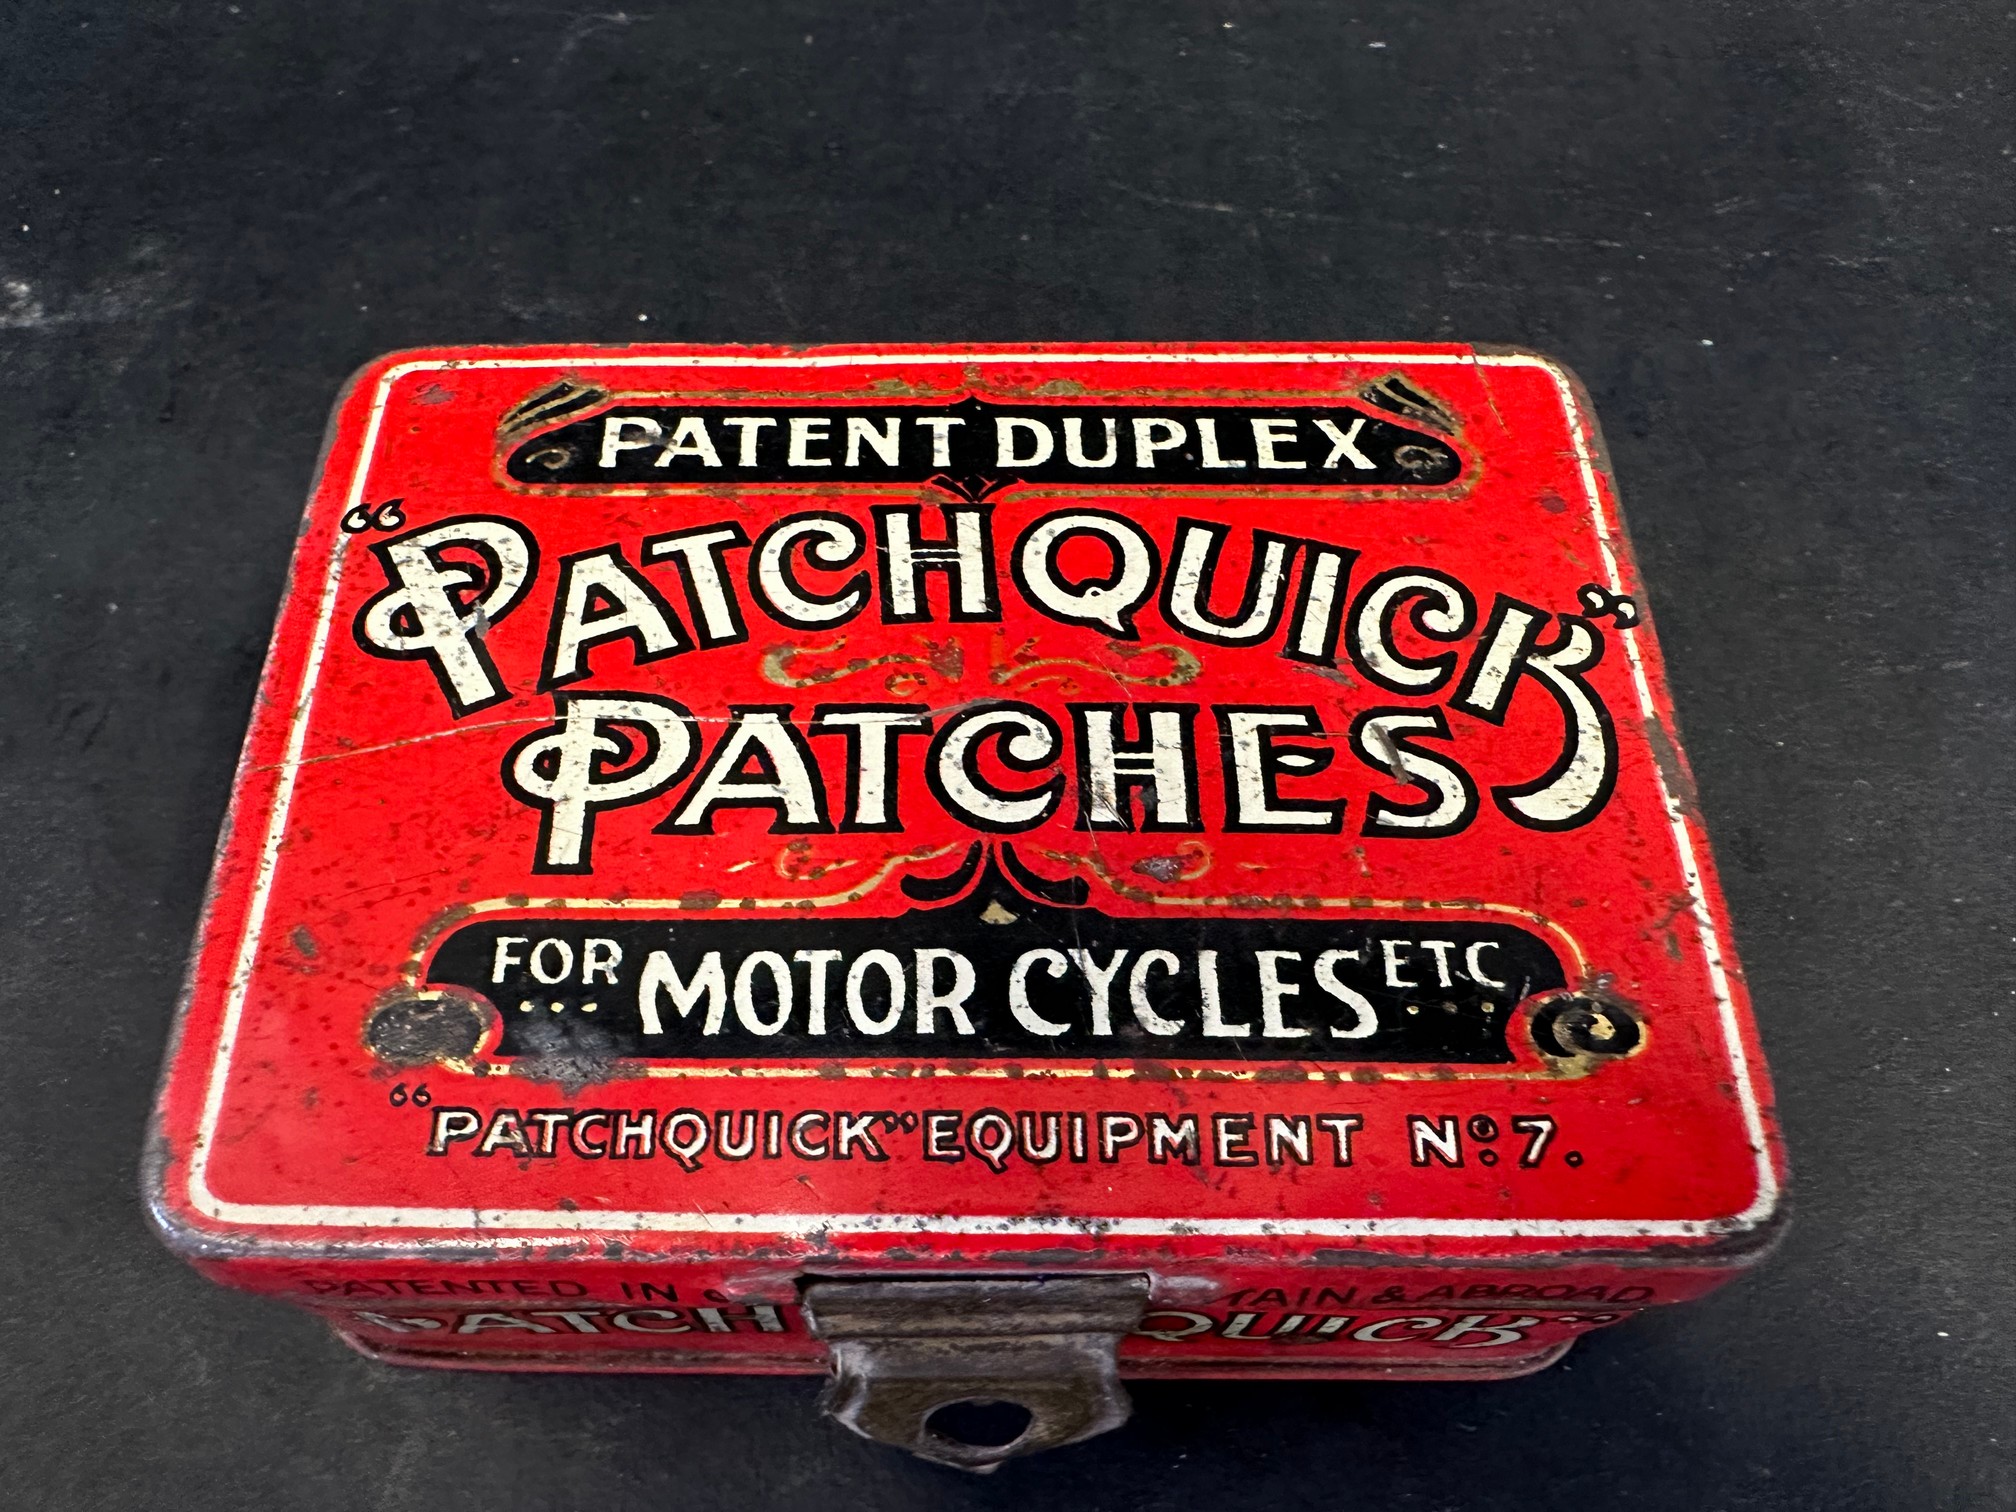 A Patchquick Patches for Motor Cycles repair outfit tin.